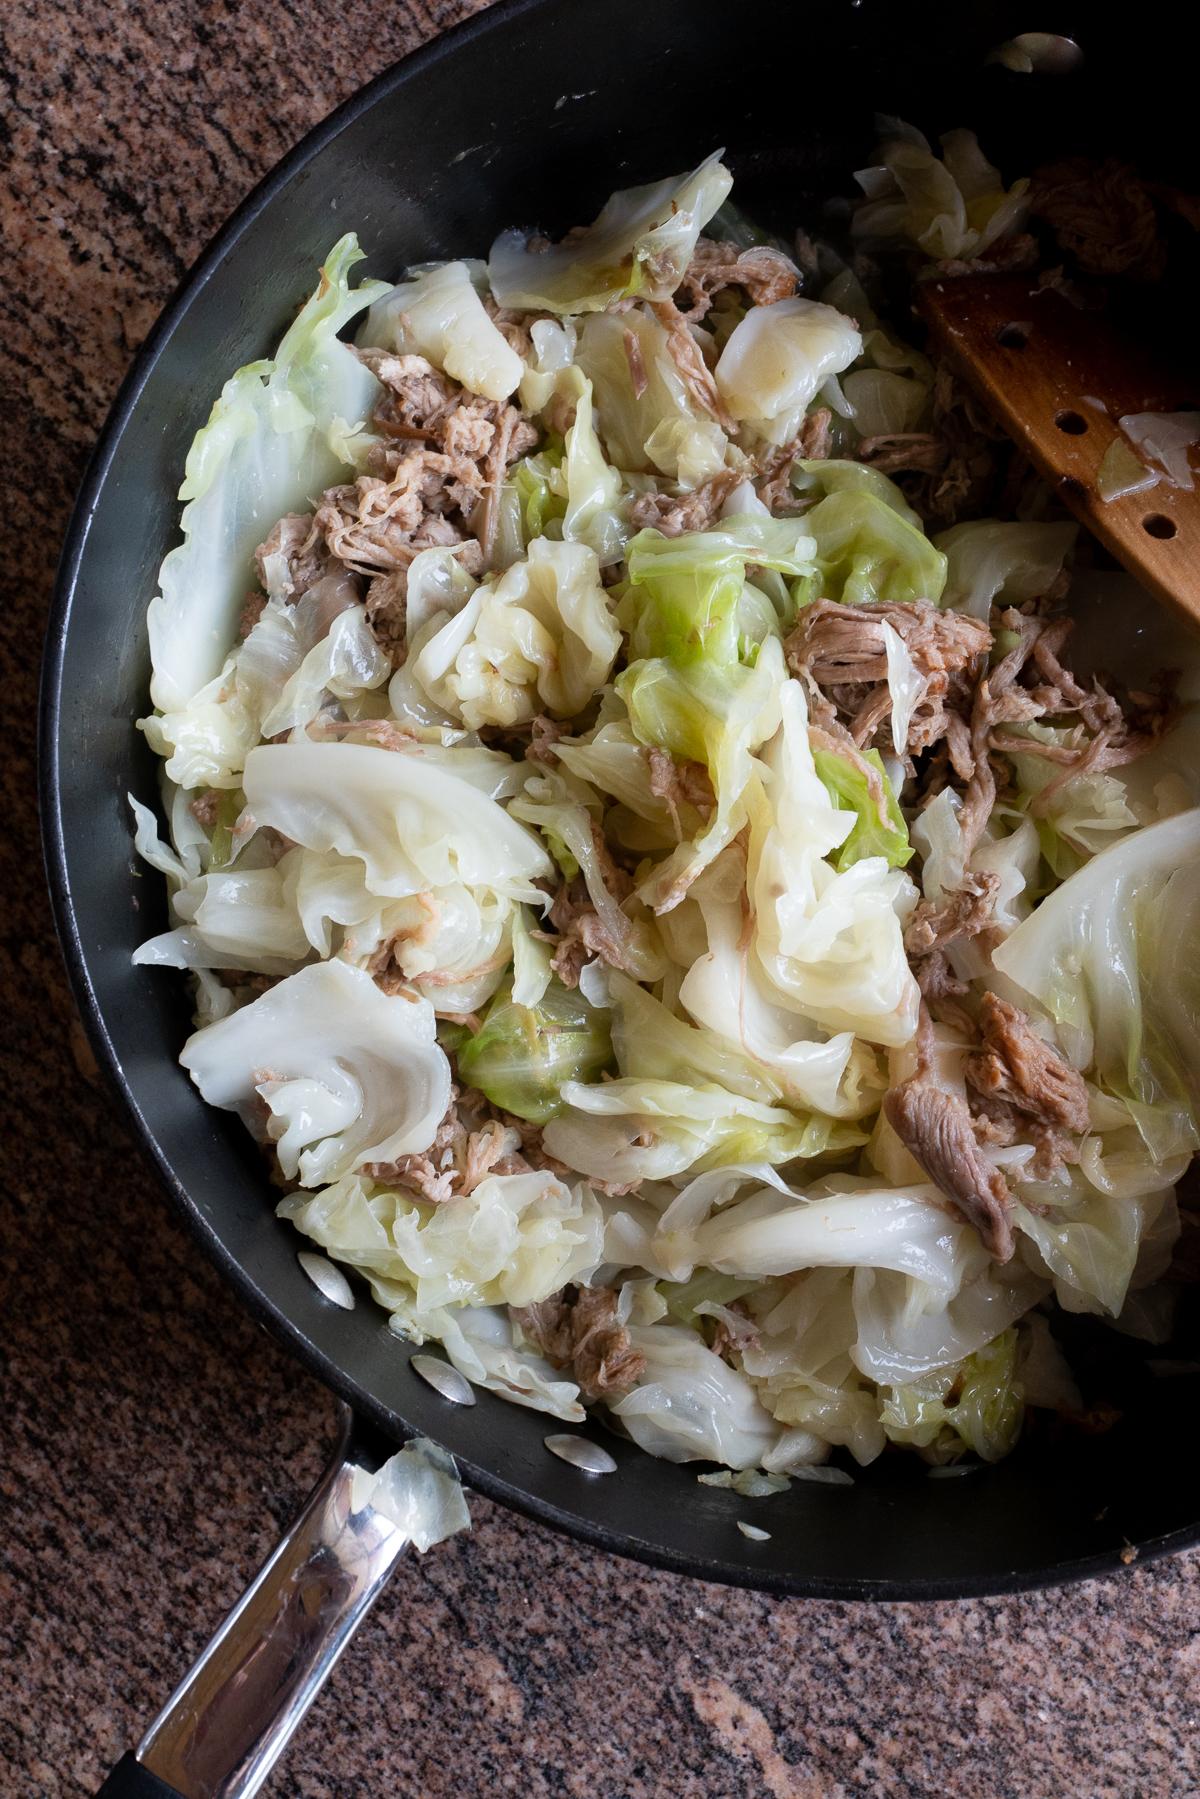 Kalua pork and cabbage in the saucepan, ready to eat